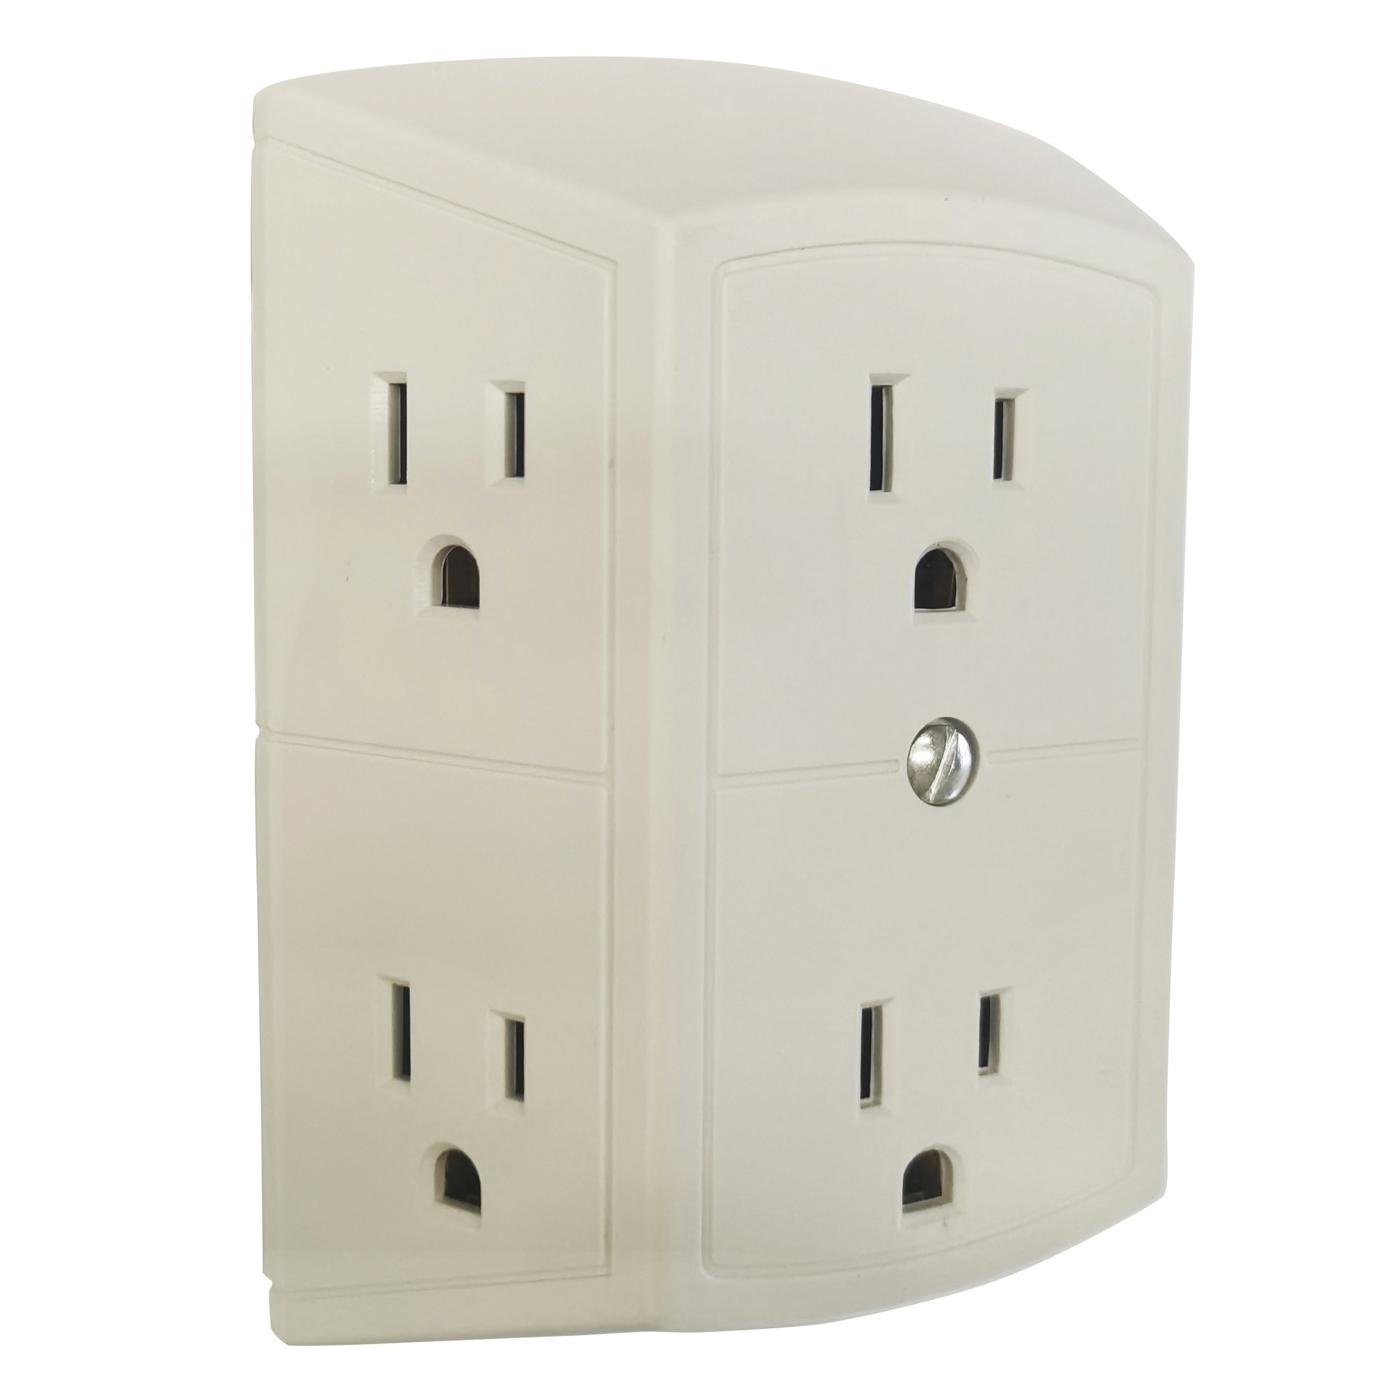 H-E-B 6-Outlet Adapter - White; image 2 of 2